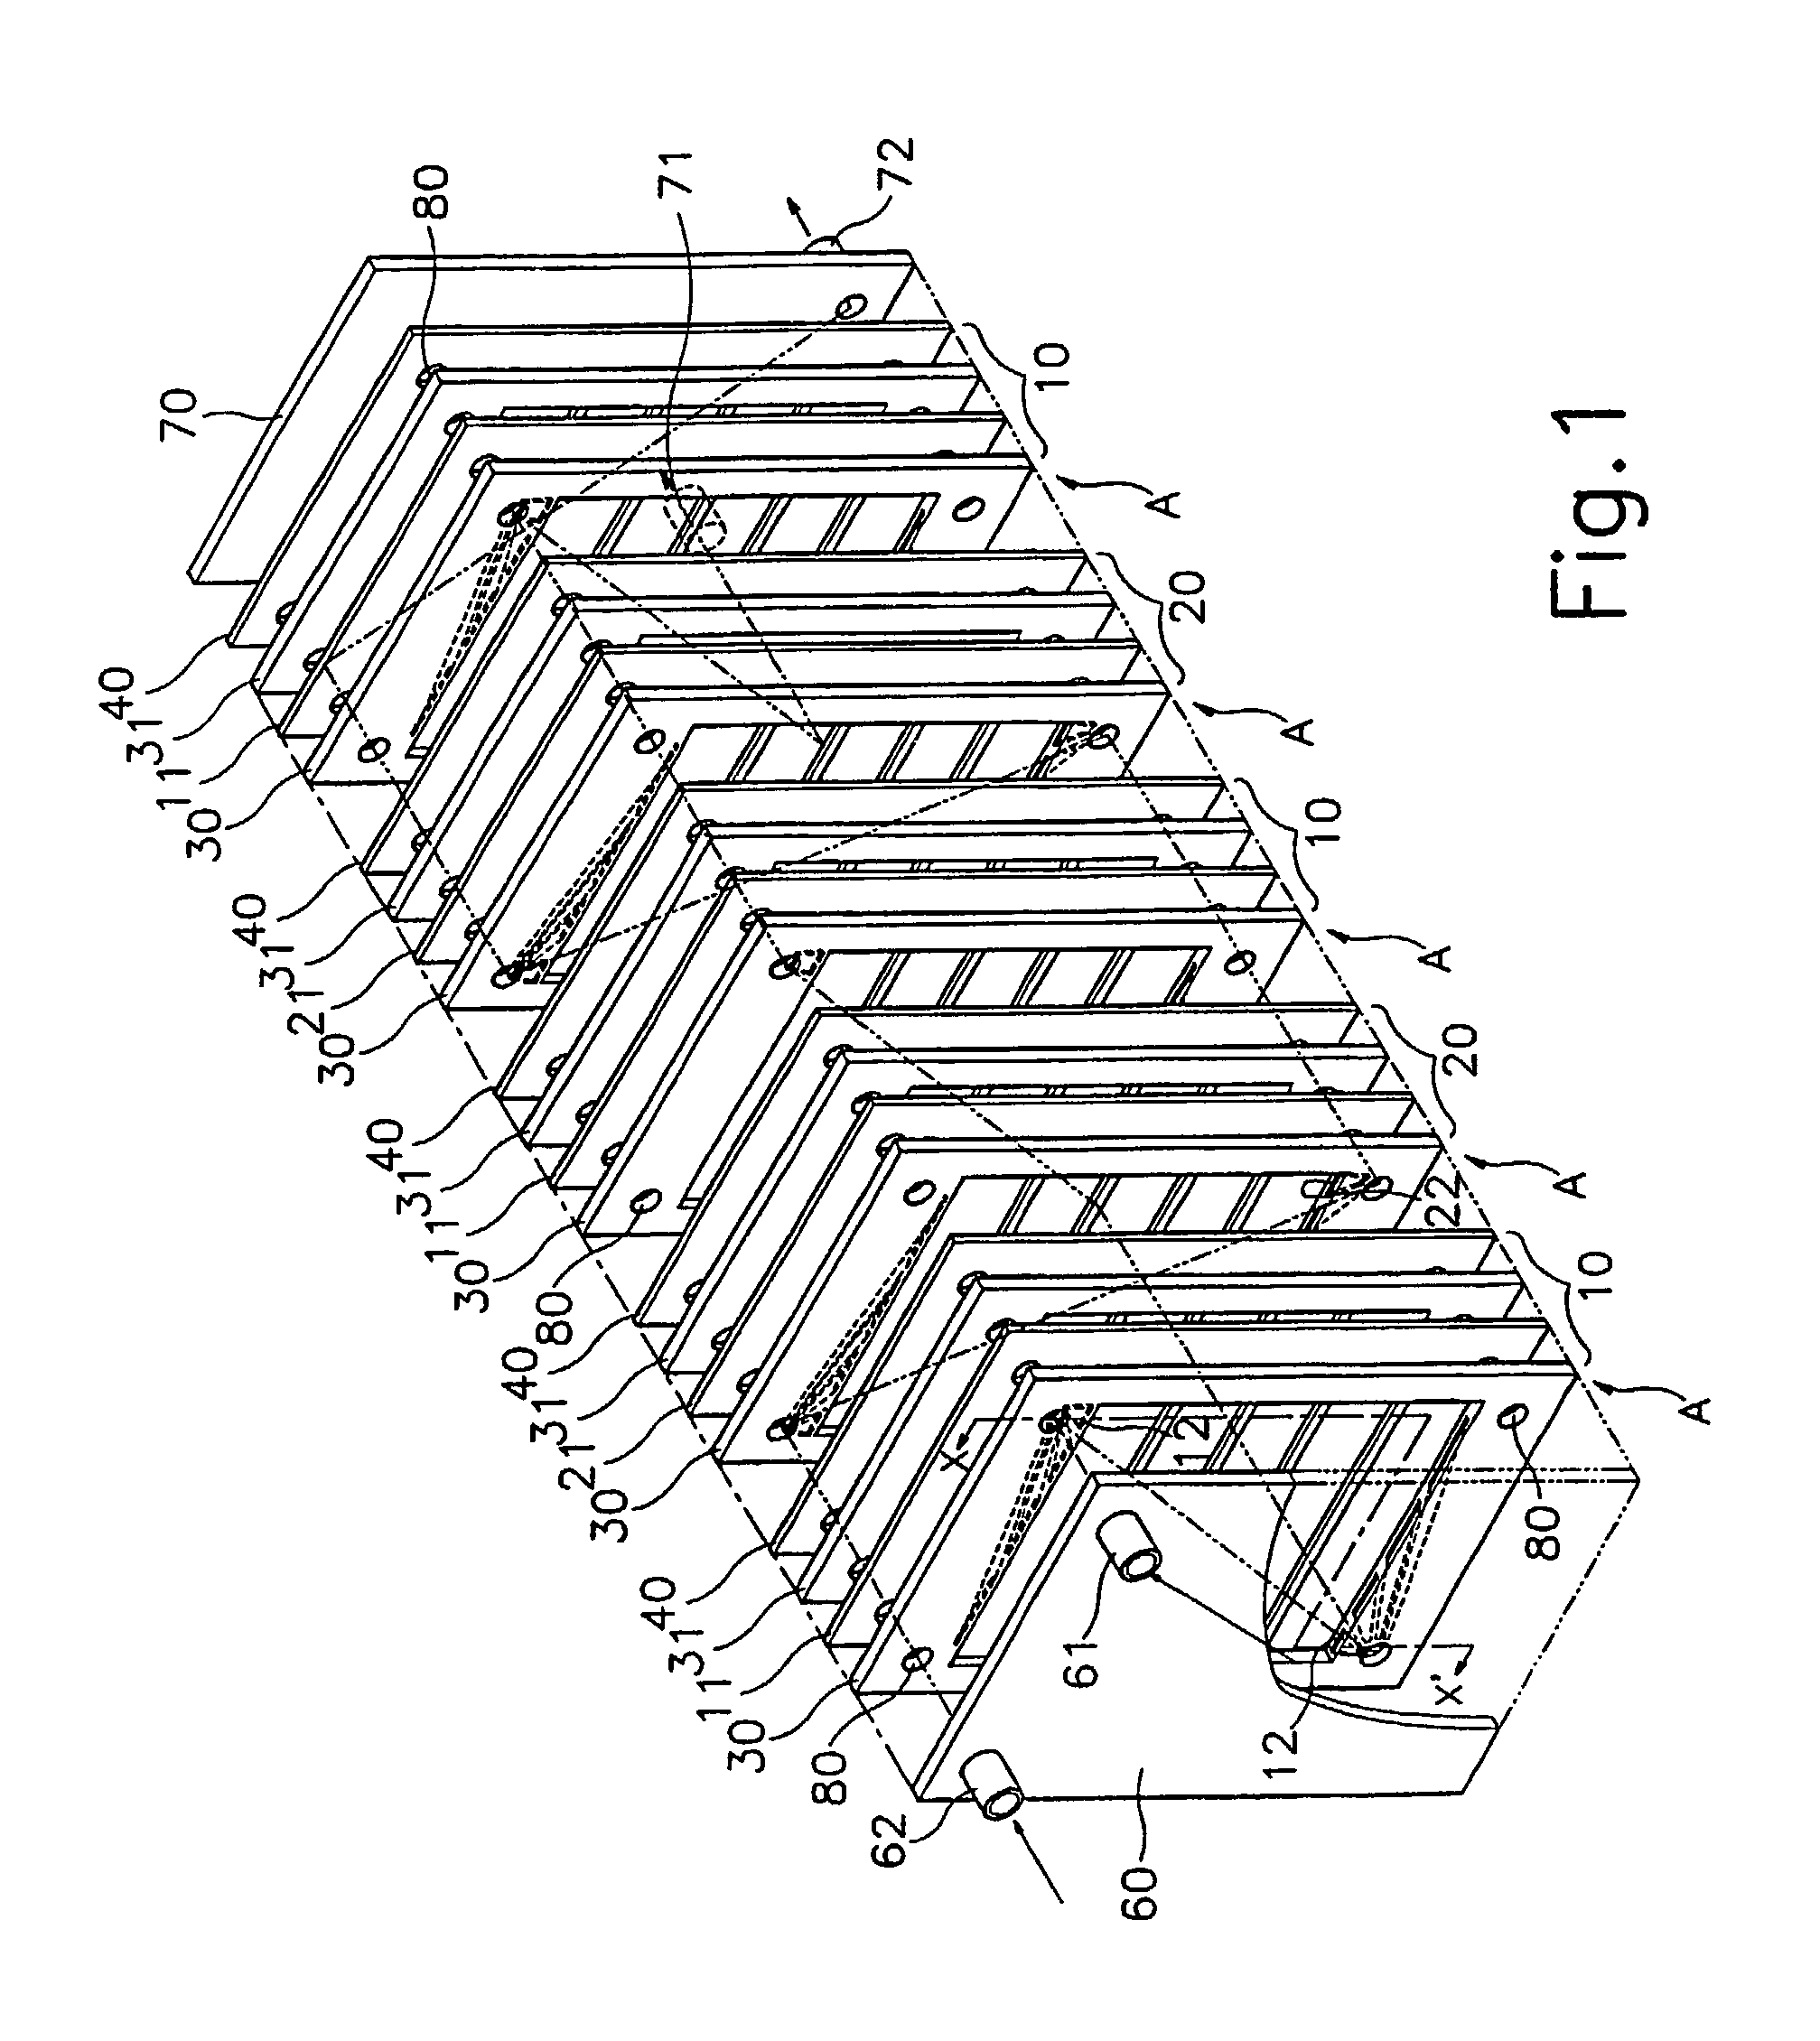 Apparatus for preparing sterilizing water and process for sterilizing water